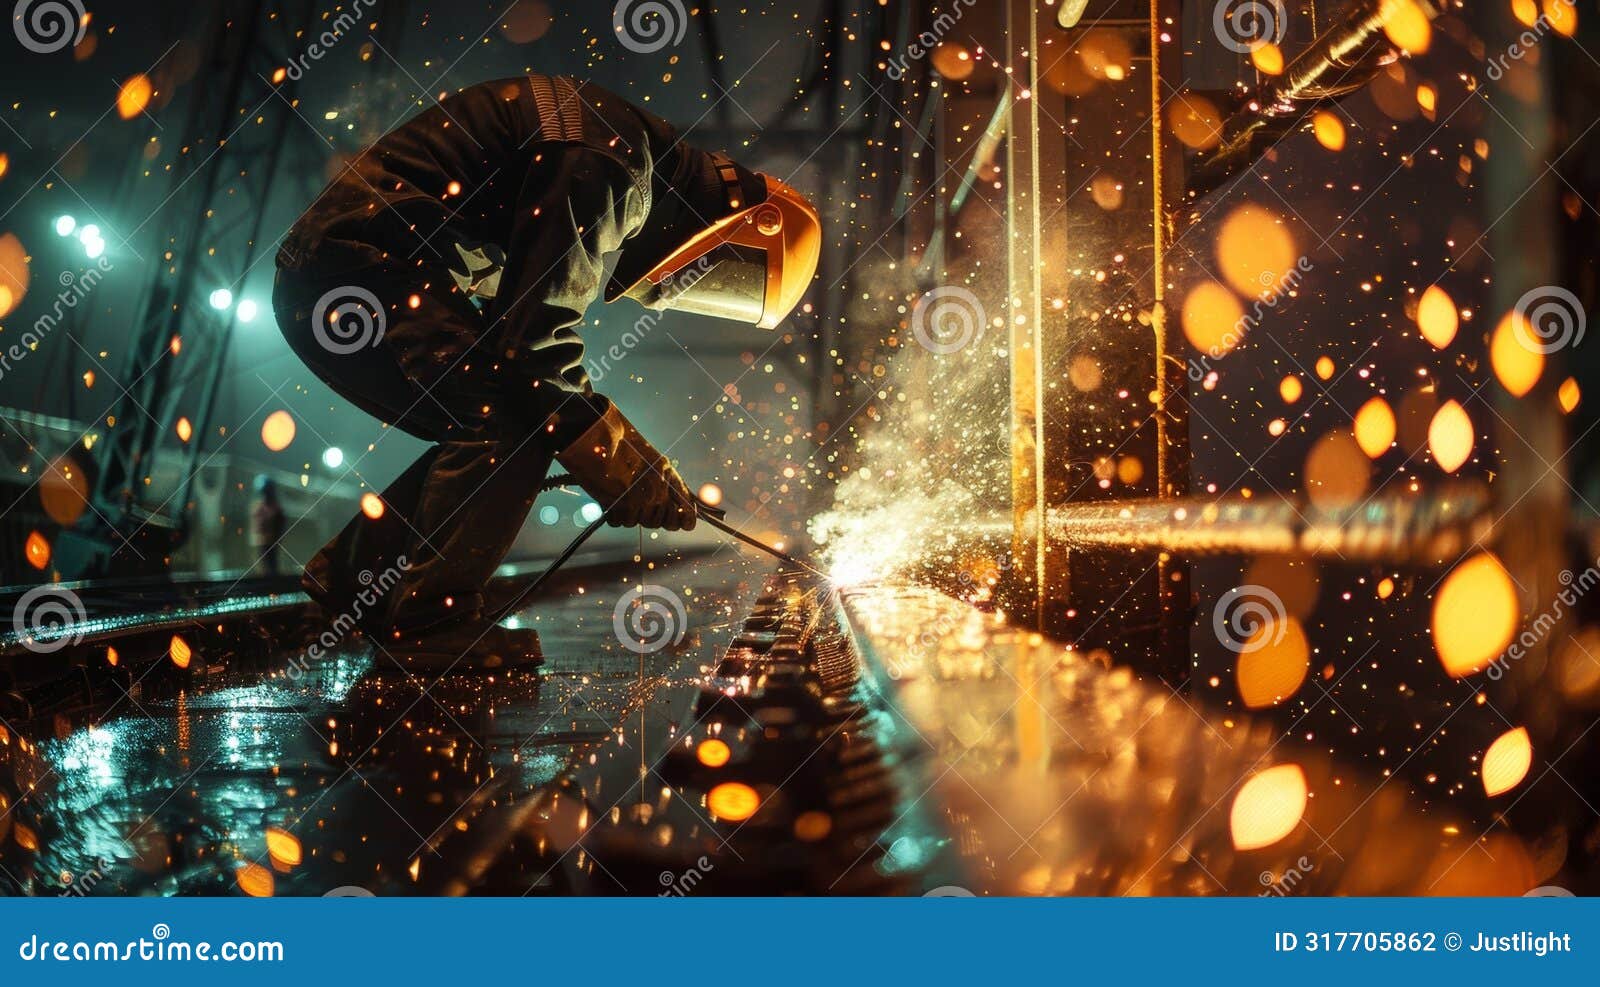 amidst a flurry of sparks a worker welds a metal sheet onto the side of a bridge strengthening its structure